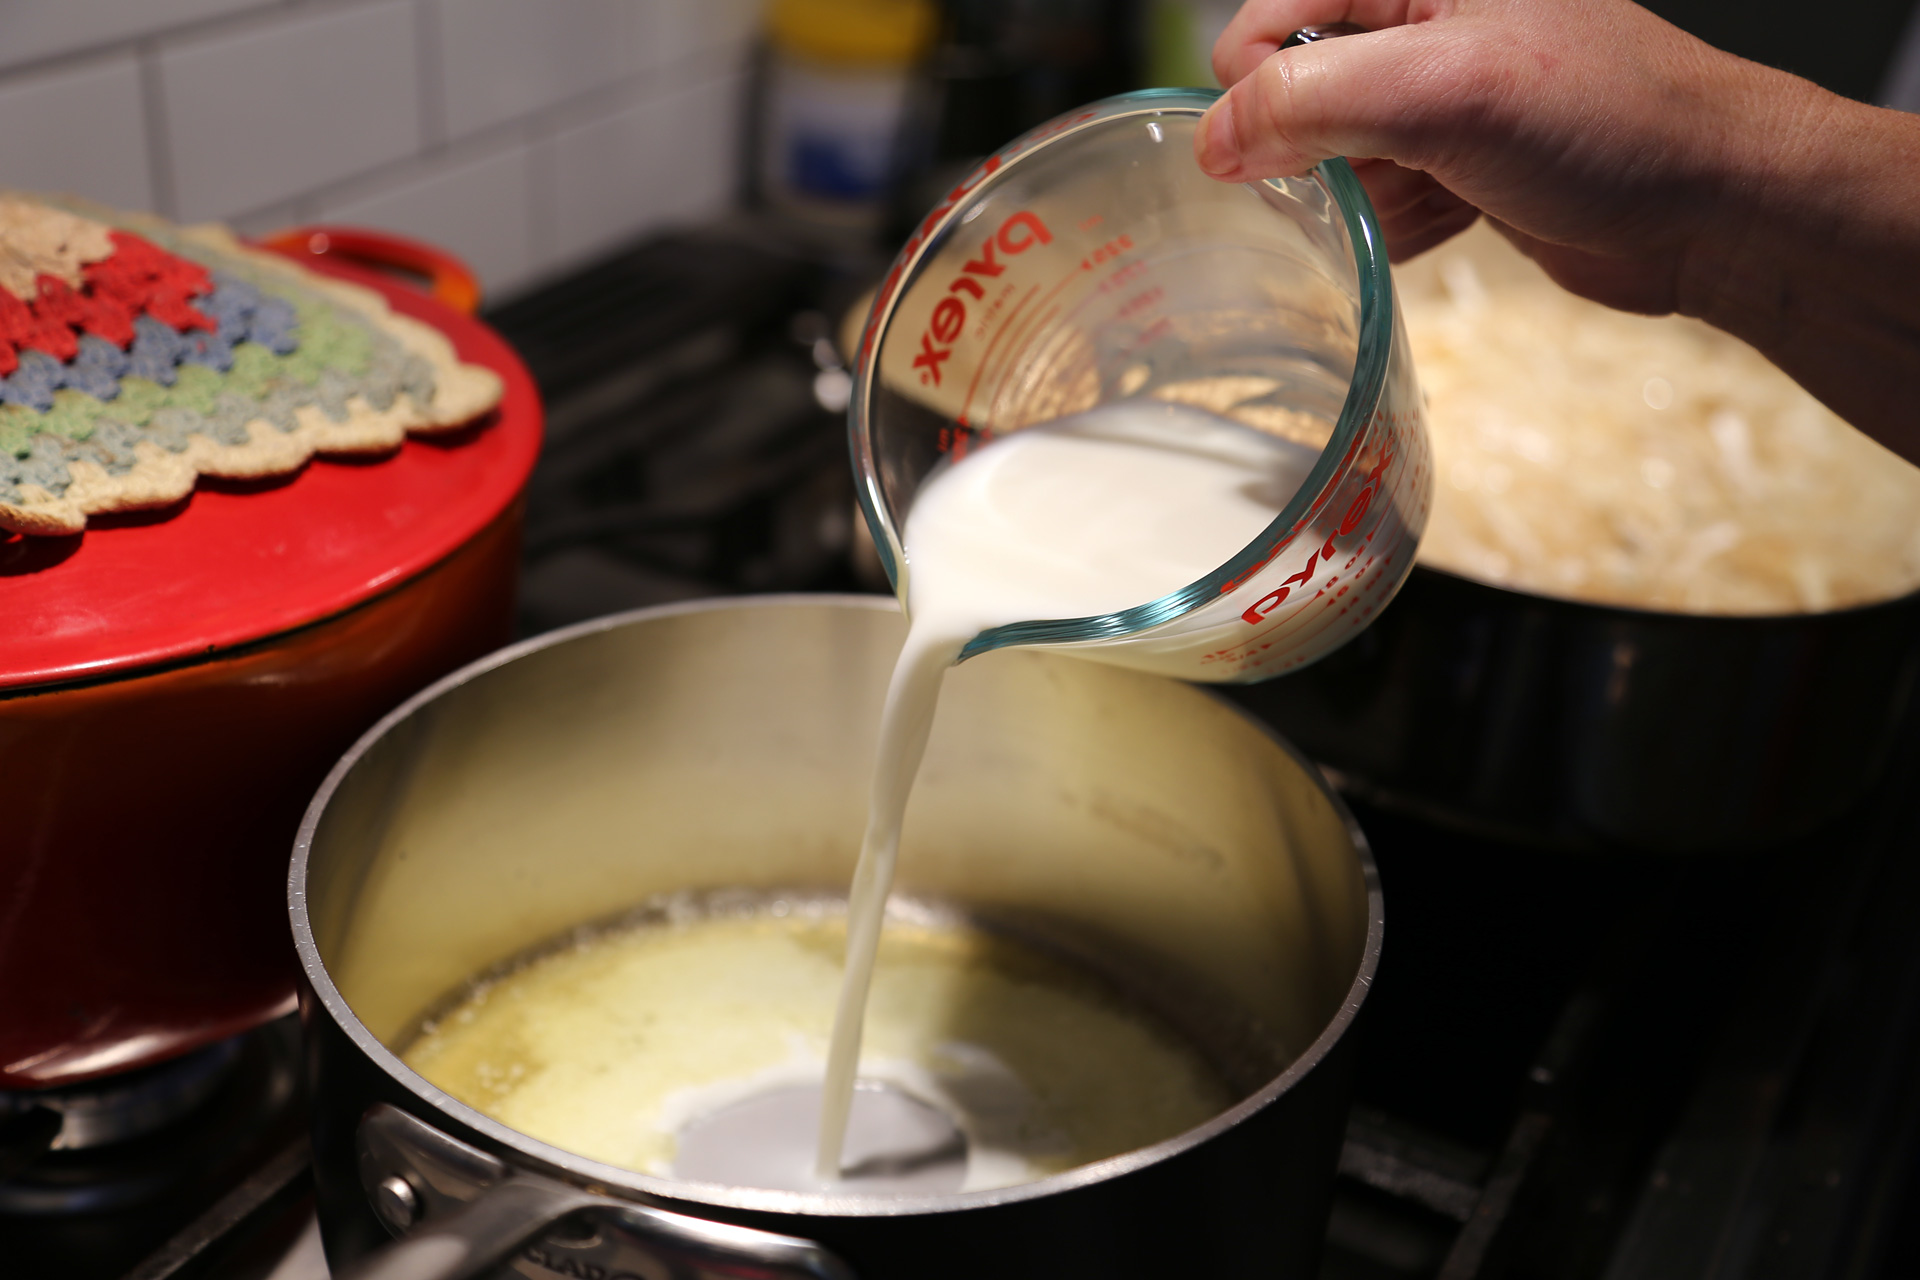 In a small saucepan over medium heat, melt the butter. Add the milk, water, and honey and heat until just warm.